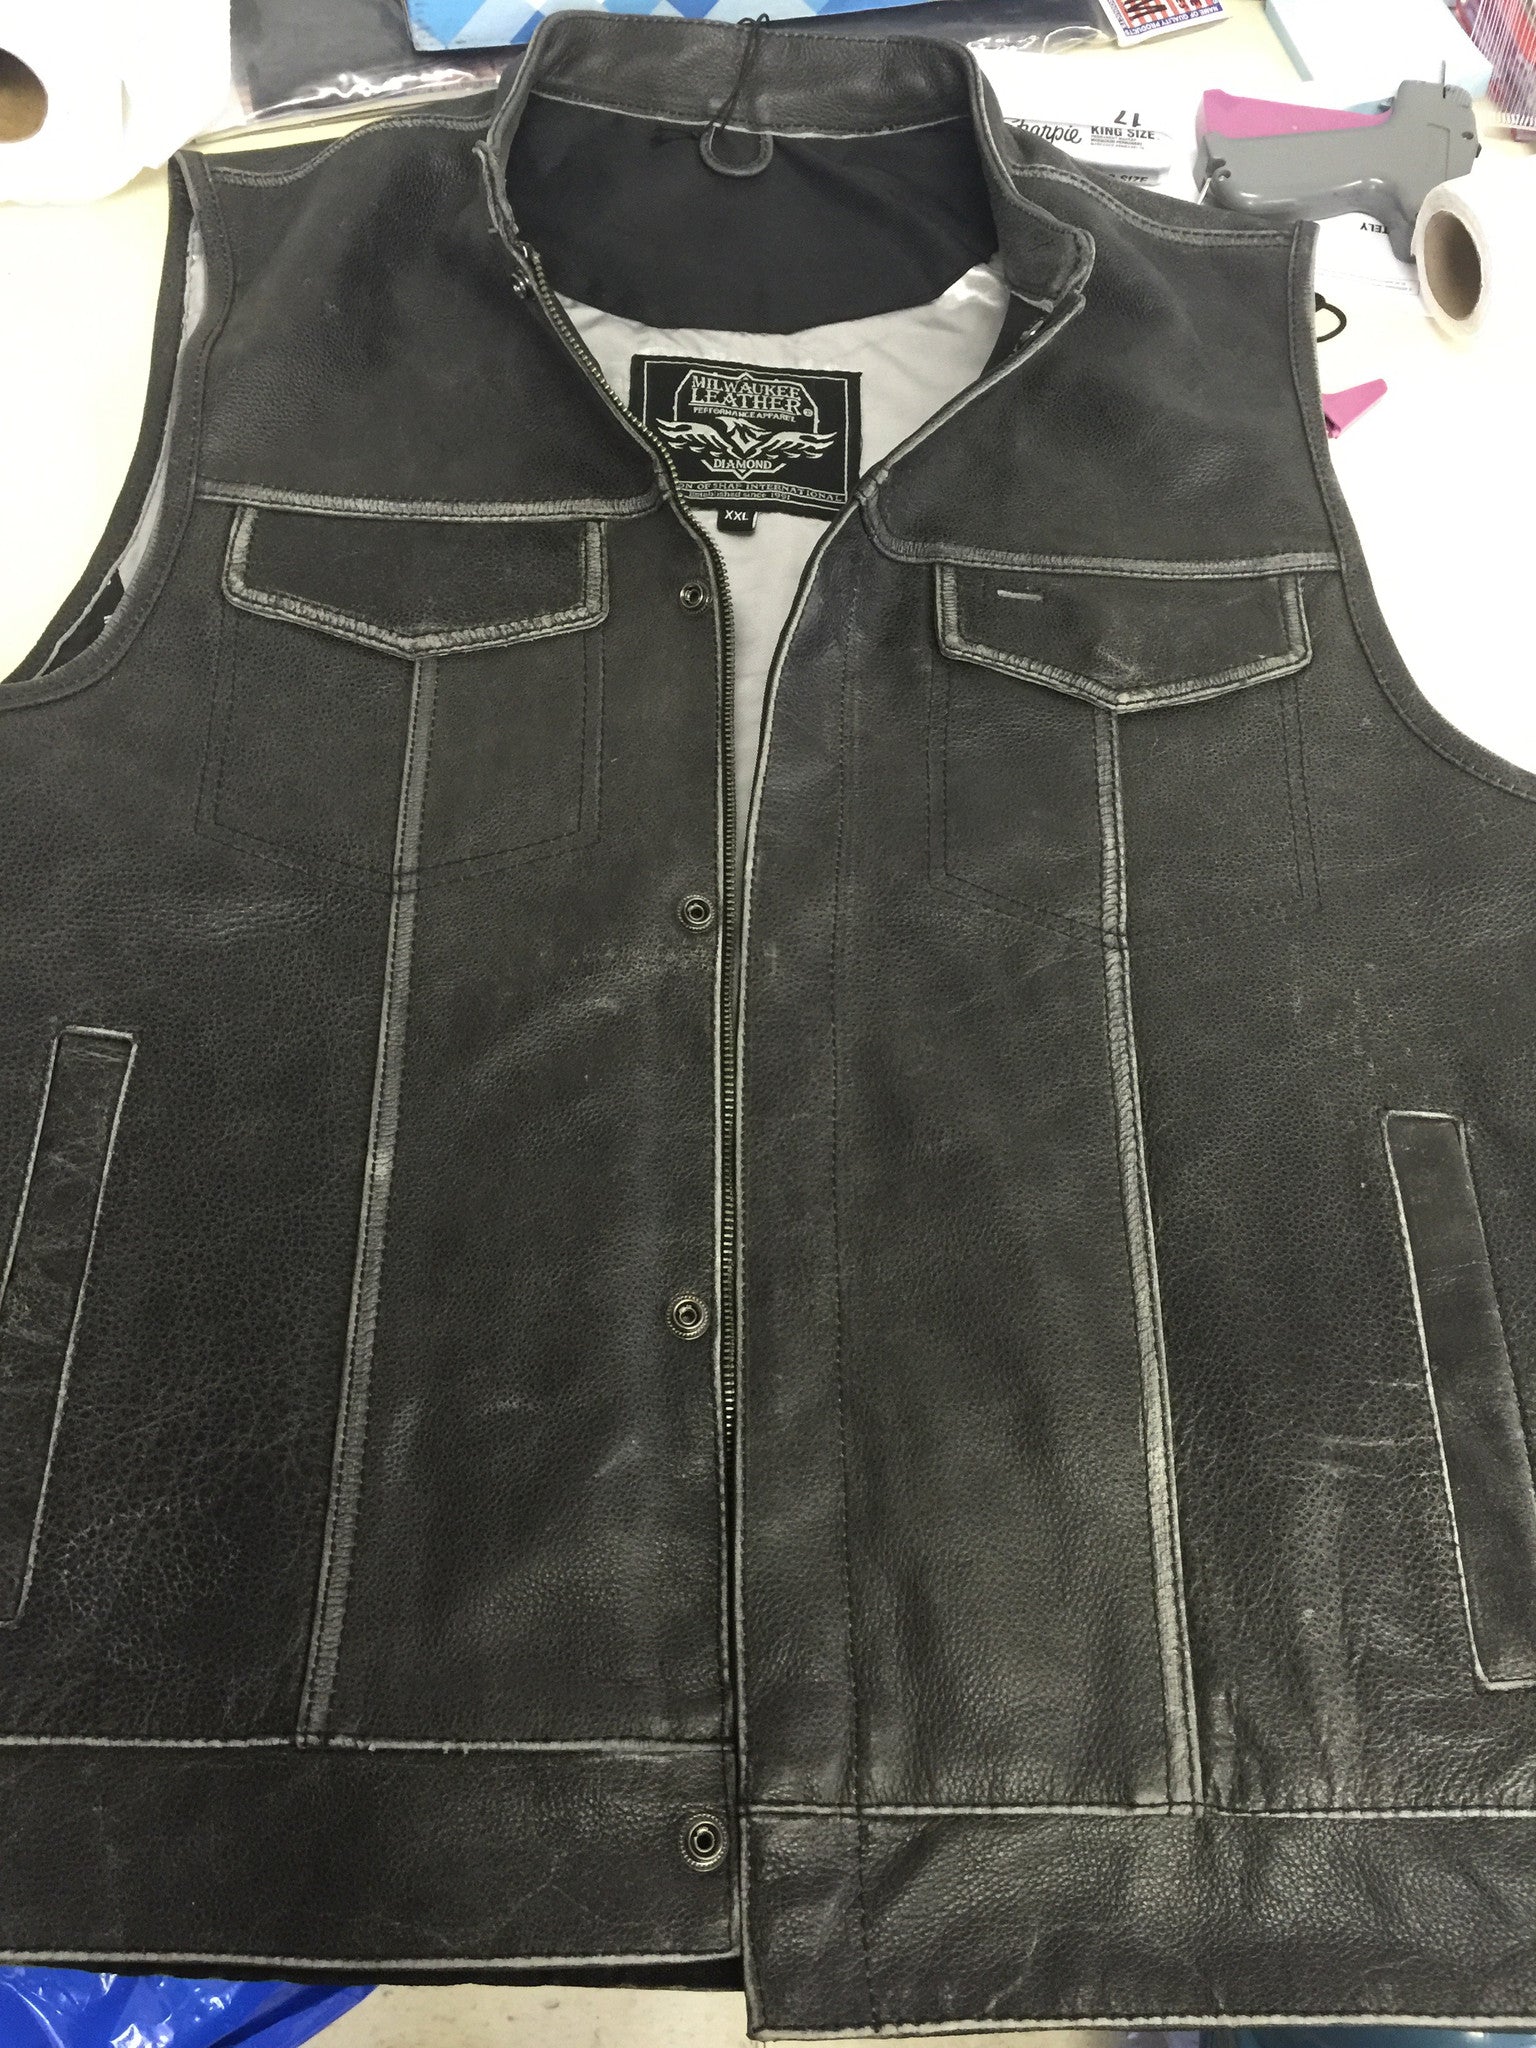 Men's Son of anarcy Distressed Grey motorcycle club leather vest with ...